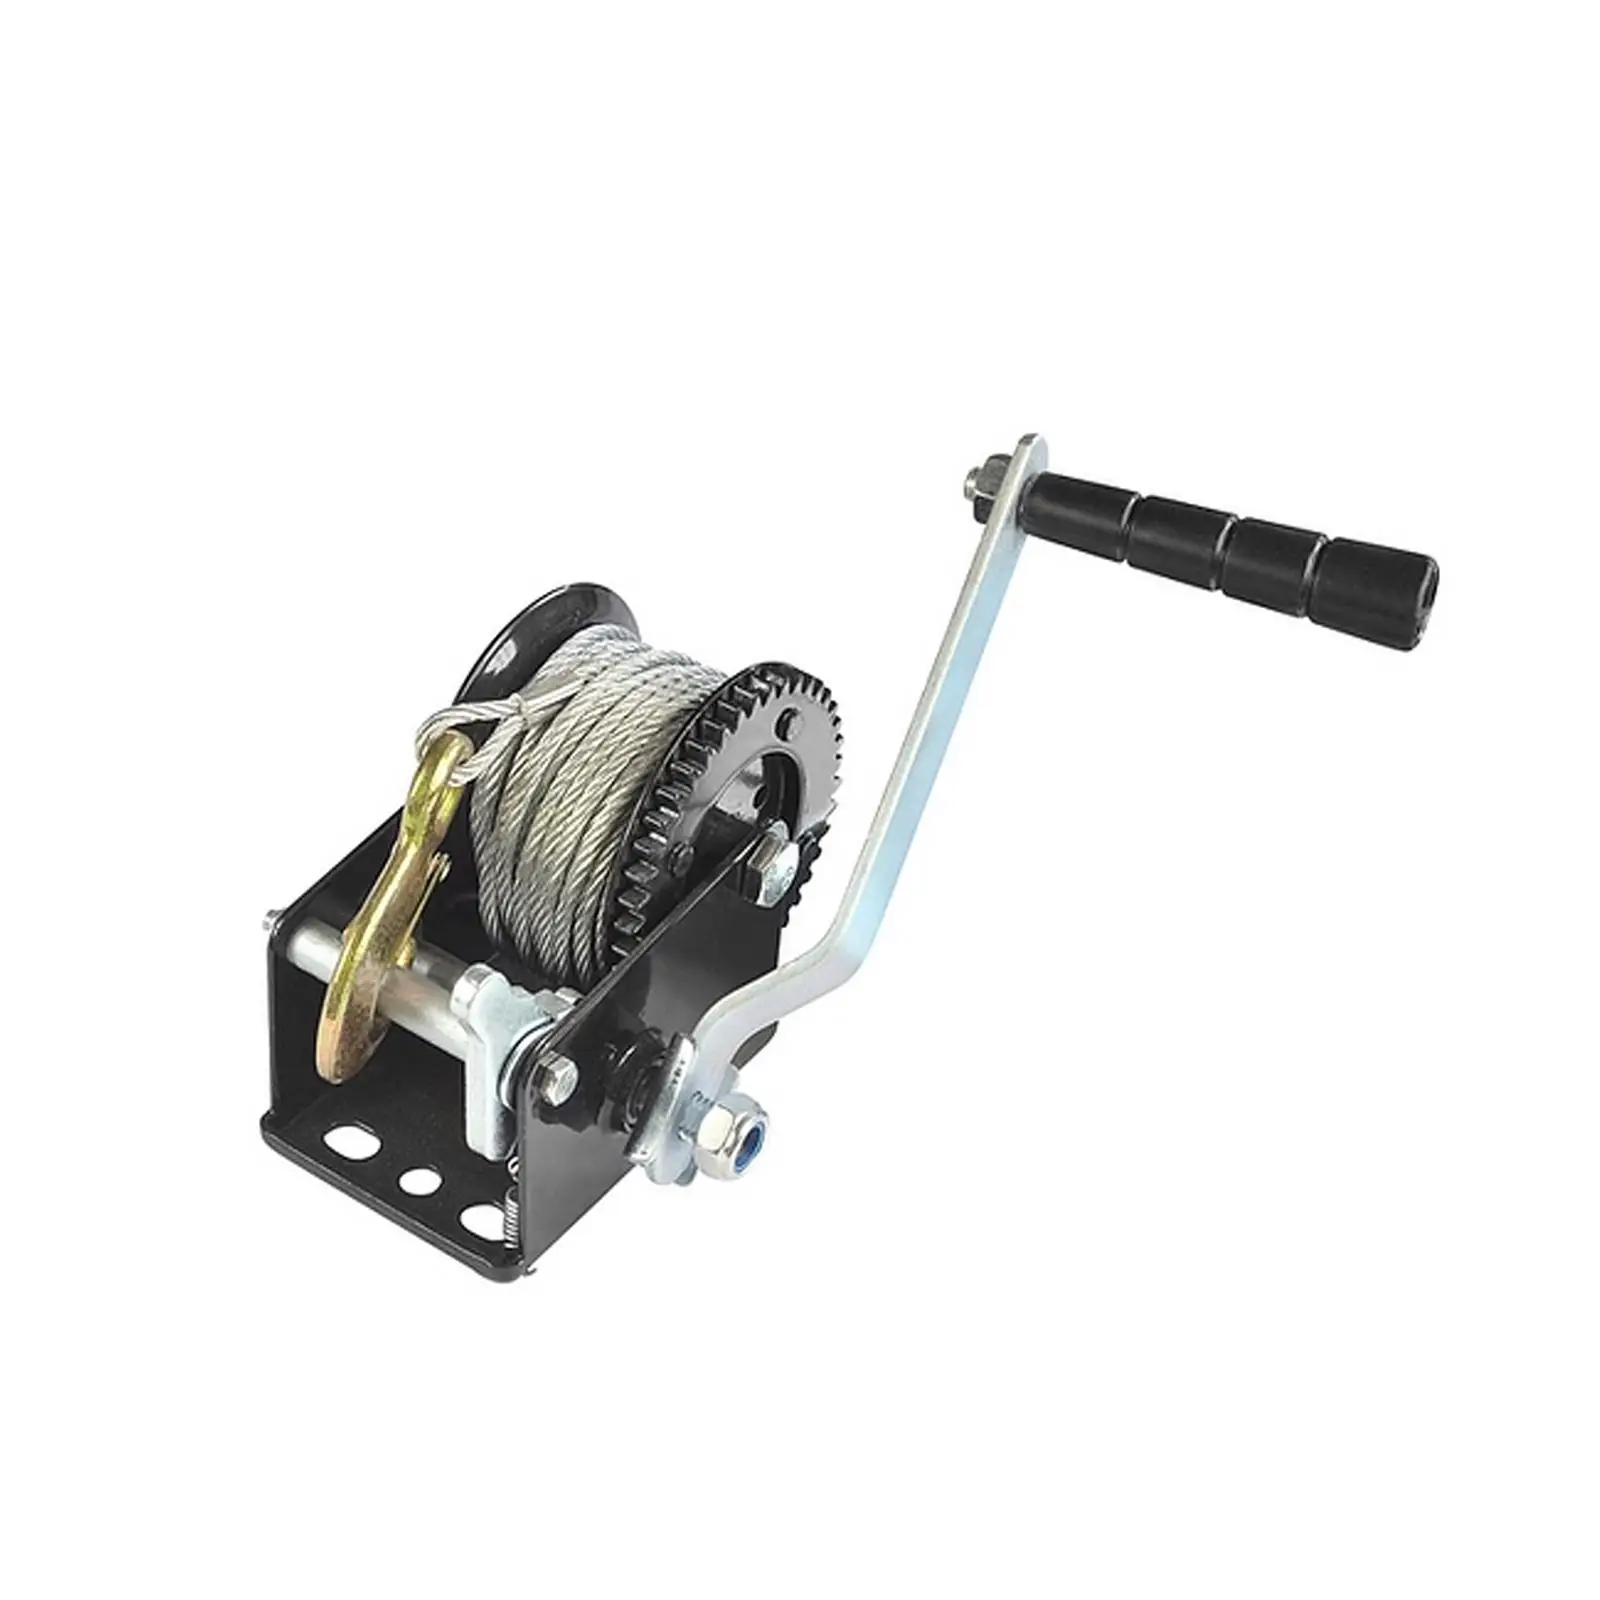 Manual Hand Winch 800lbs Replacement Parts Devices Gear with Rope Manual Simple to Use Components Cable Trailer Winch for Car